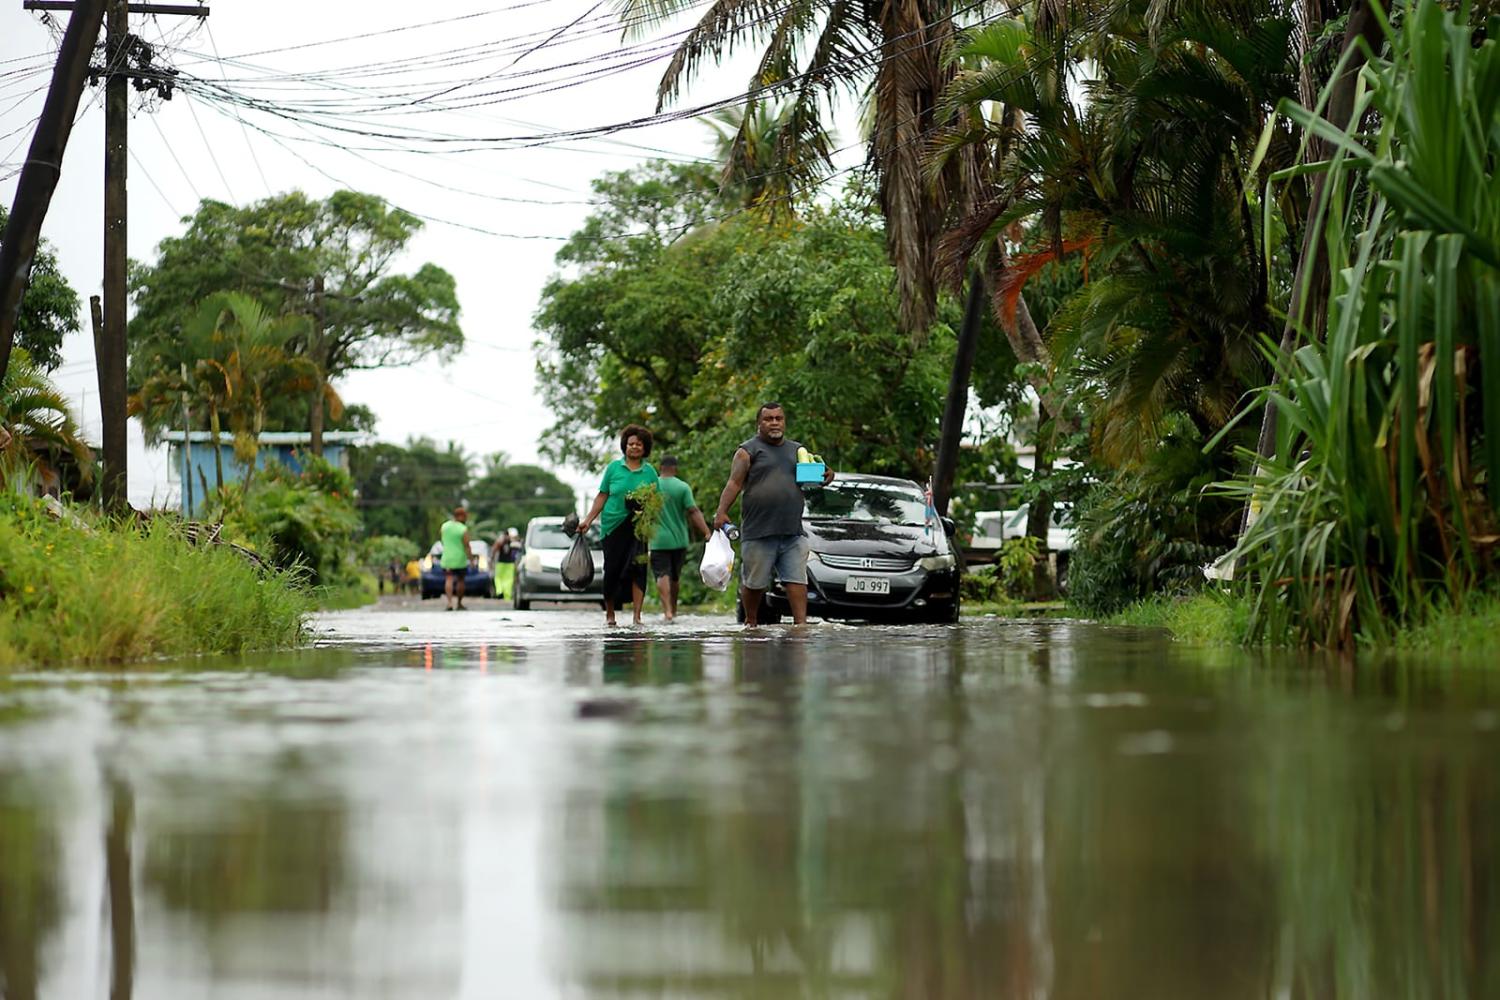 Residents wade through flooded streets in Fiji's capital city of Suva in December 2020 ahead of super Cyclone Yasa (Leon Lord/AFP via Getty Images)